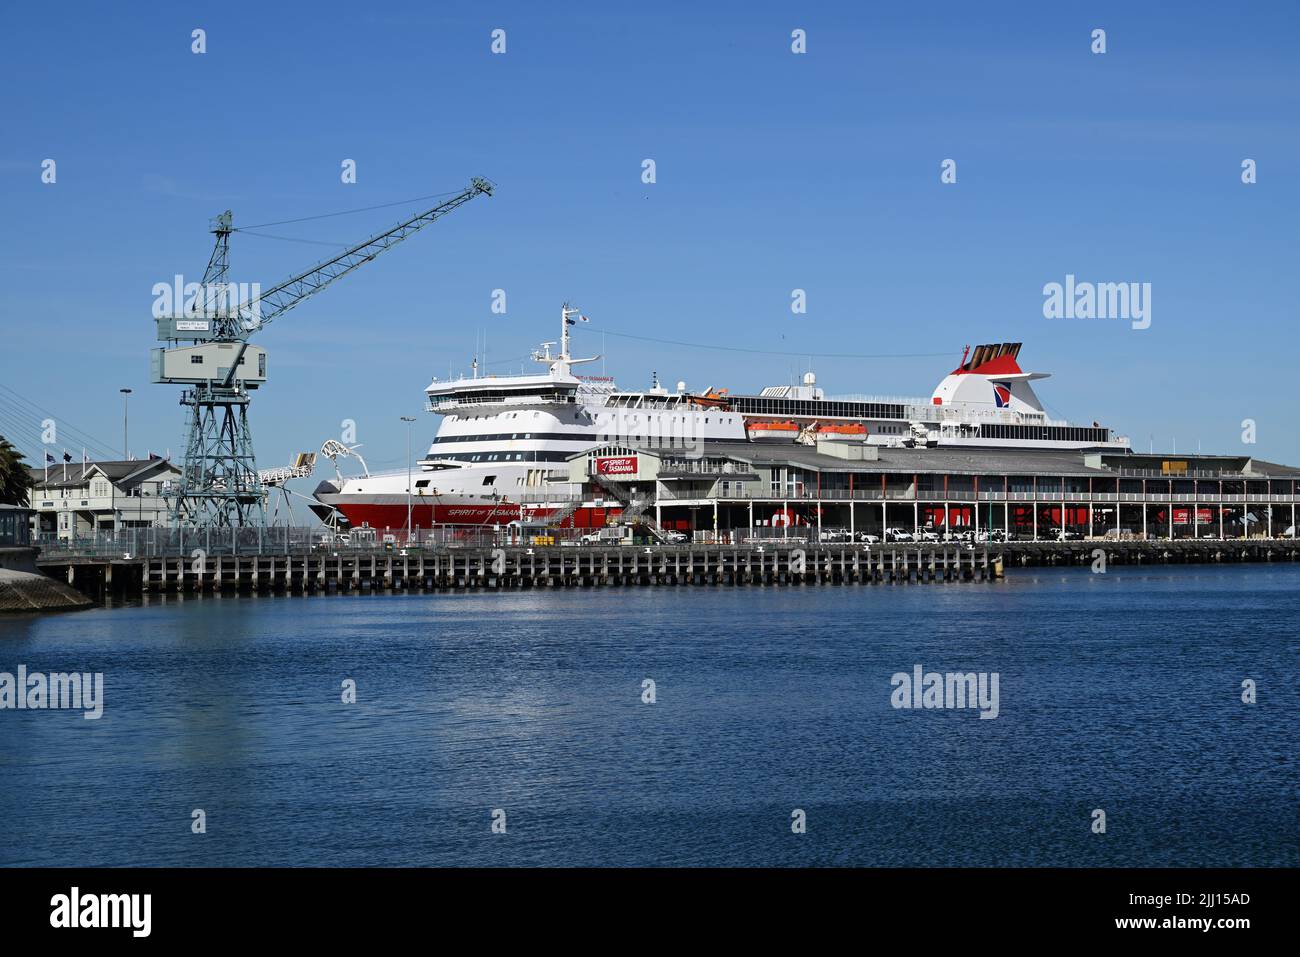 Station Pier, seen from the west, with the Spirit of Tasmania II docked at one of its berths, during a clear day Stock Photo